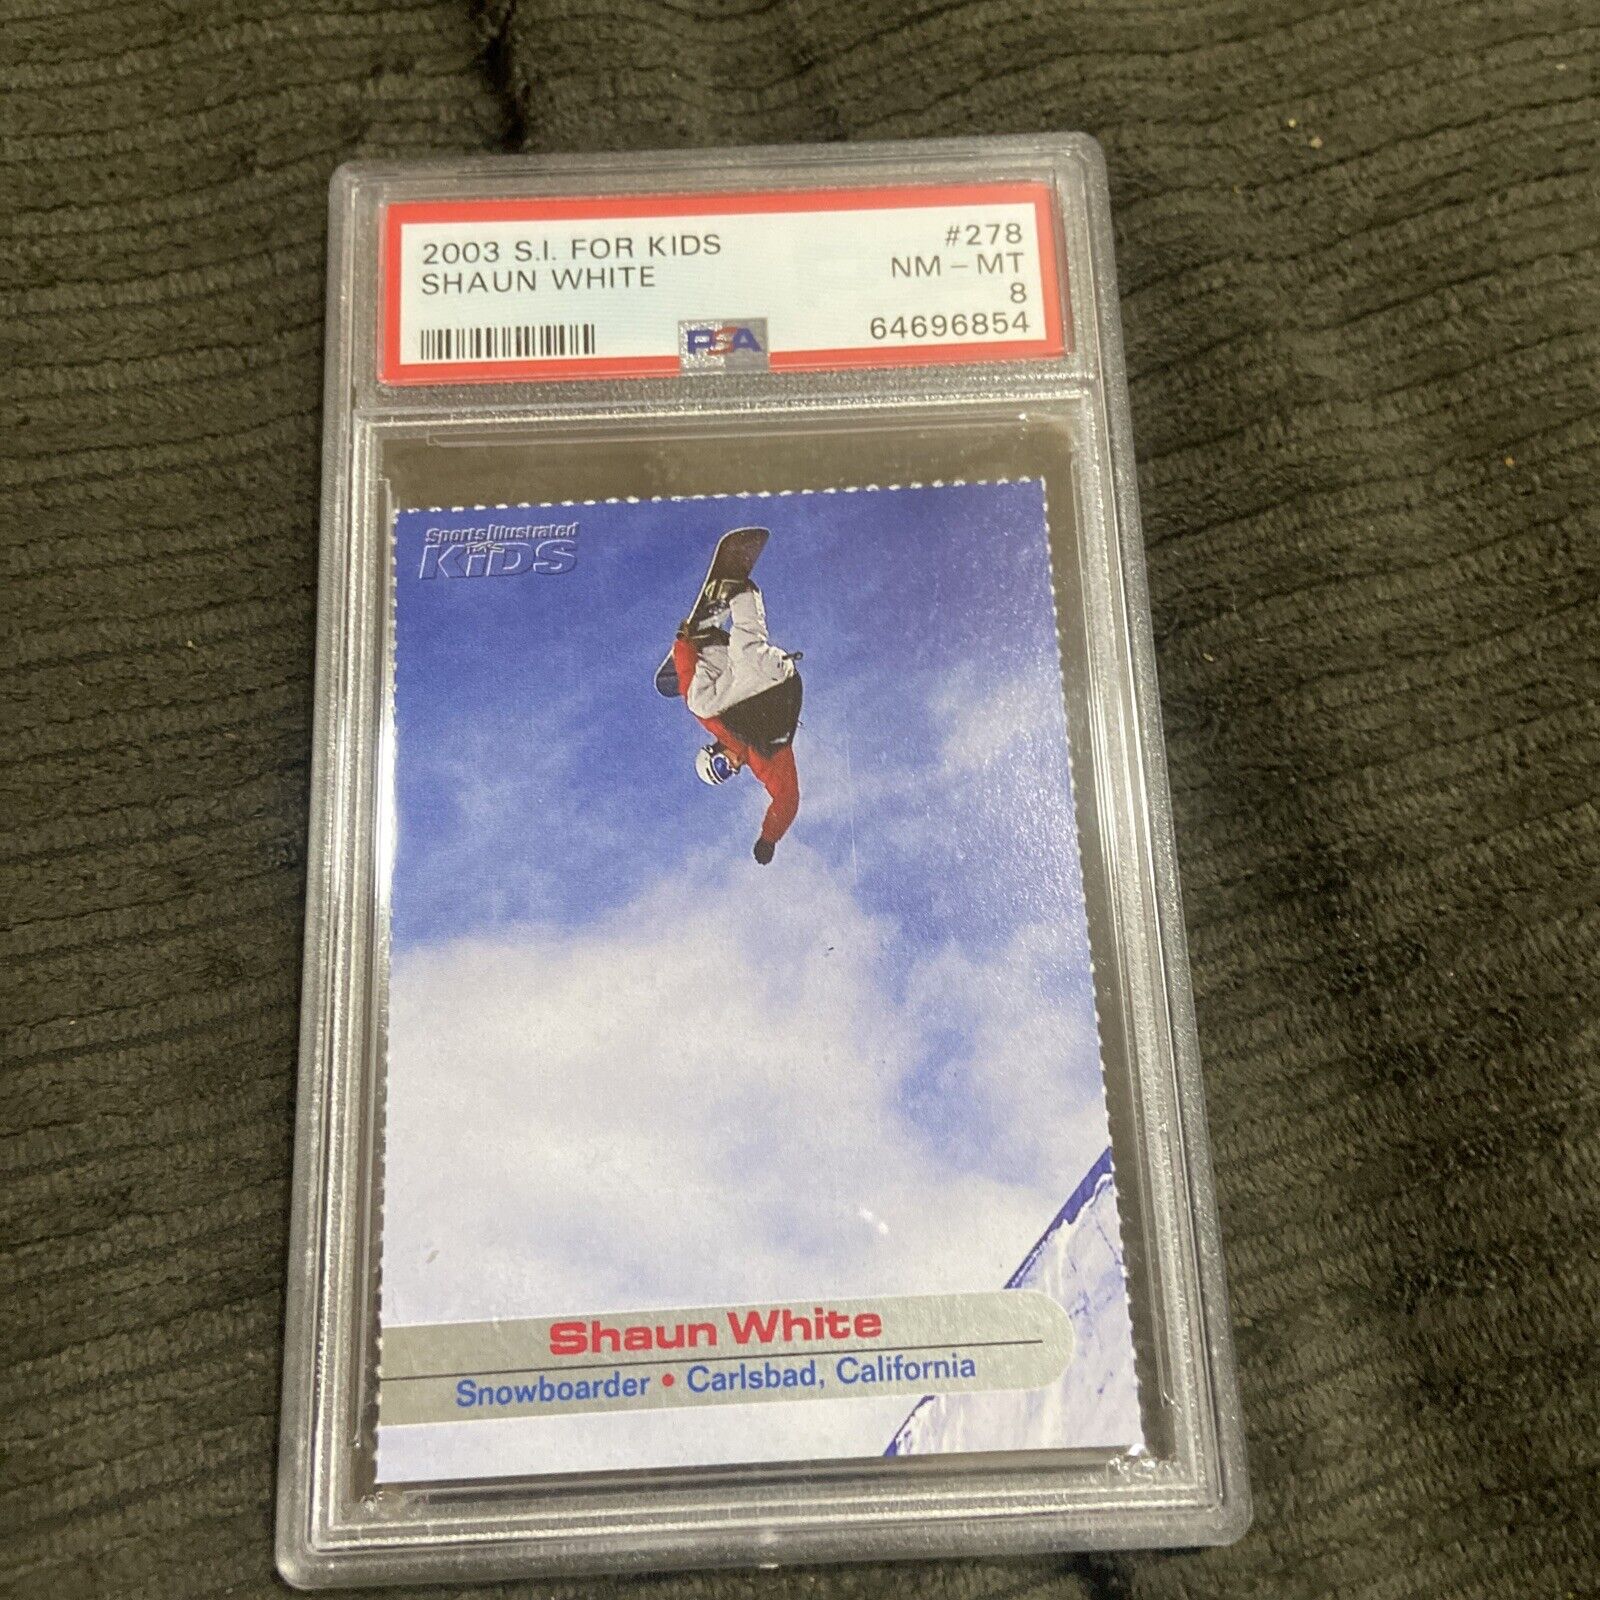 Shaun White Rookie Rare 2003 SI For Kids Card RC #278 PSA 8 Pop 6 Only 6 Higher!